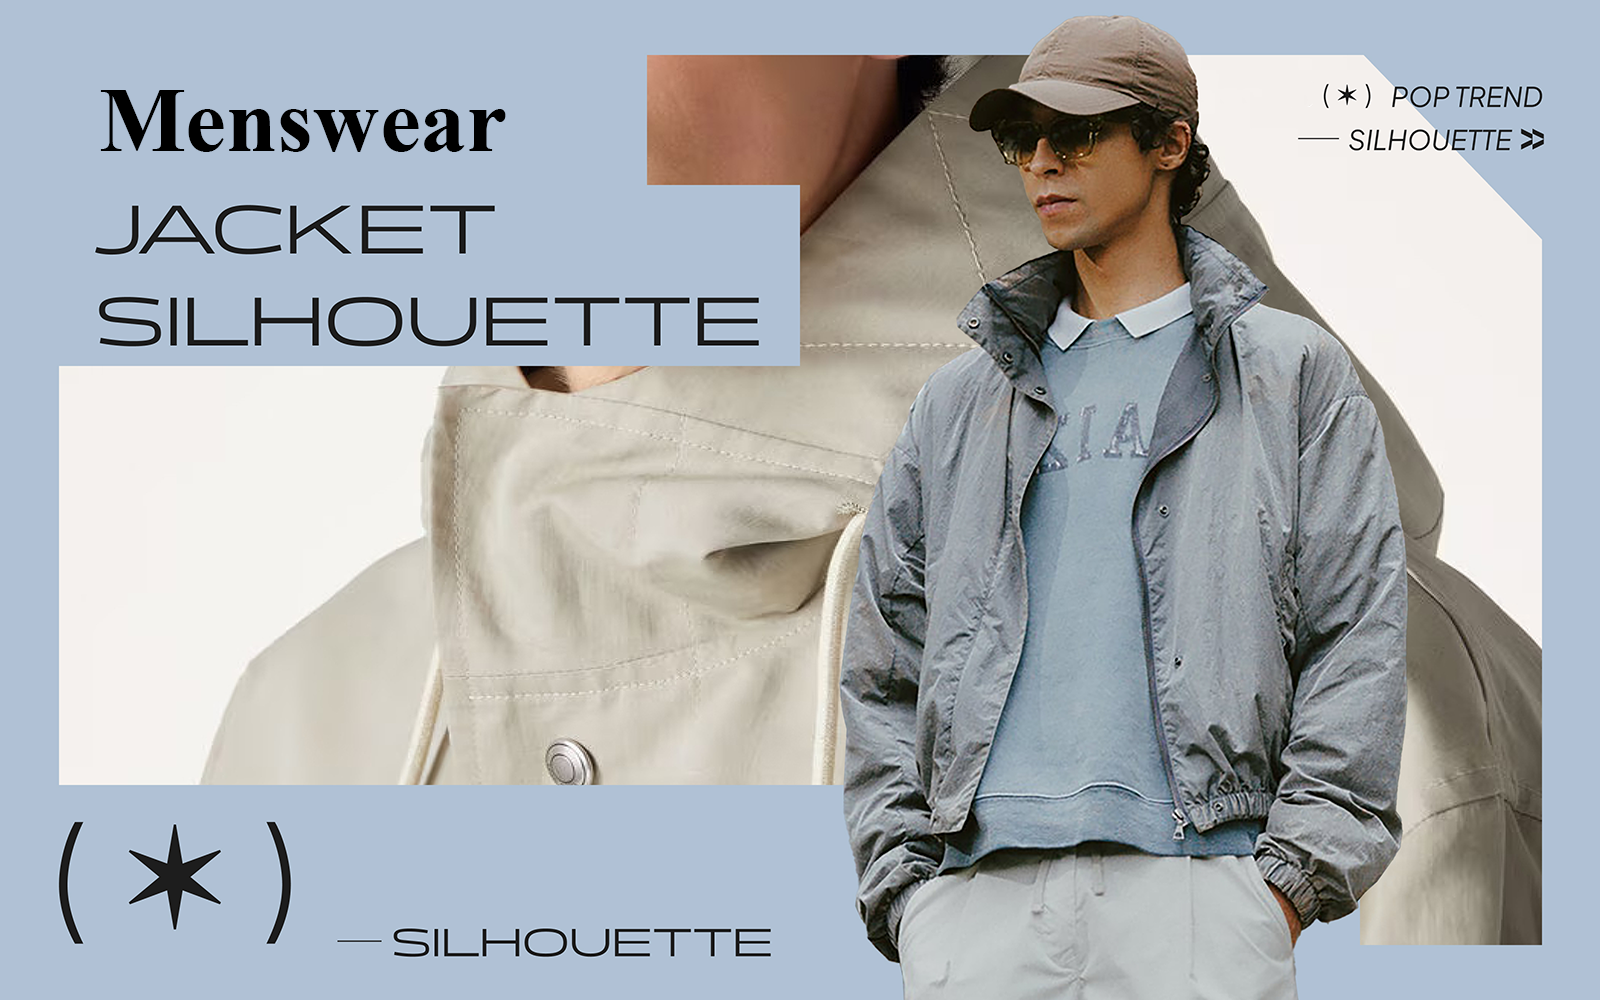 Commuter Outdoors -- The Silhouette Trend for Men's Jacket